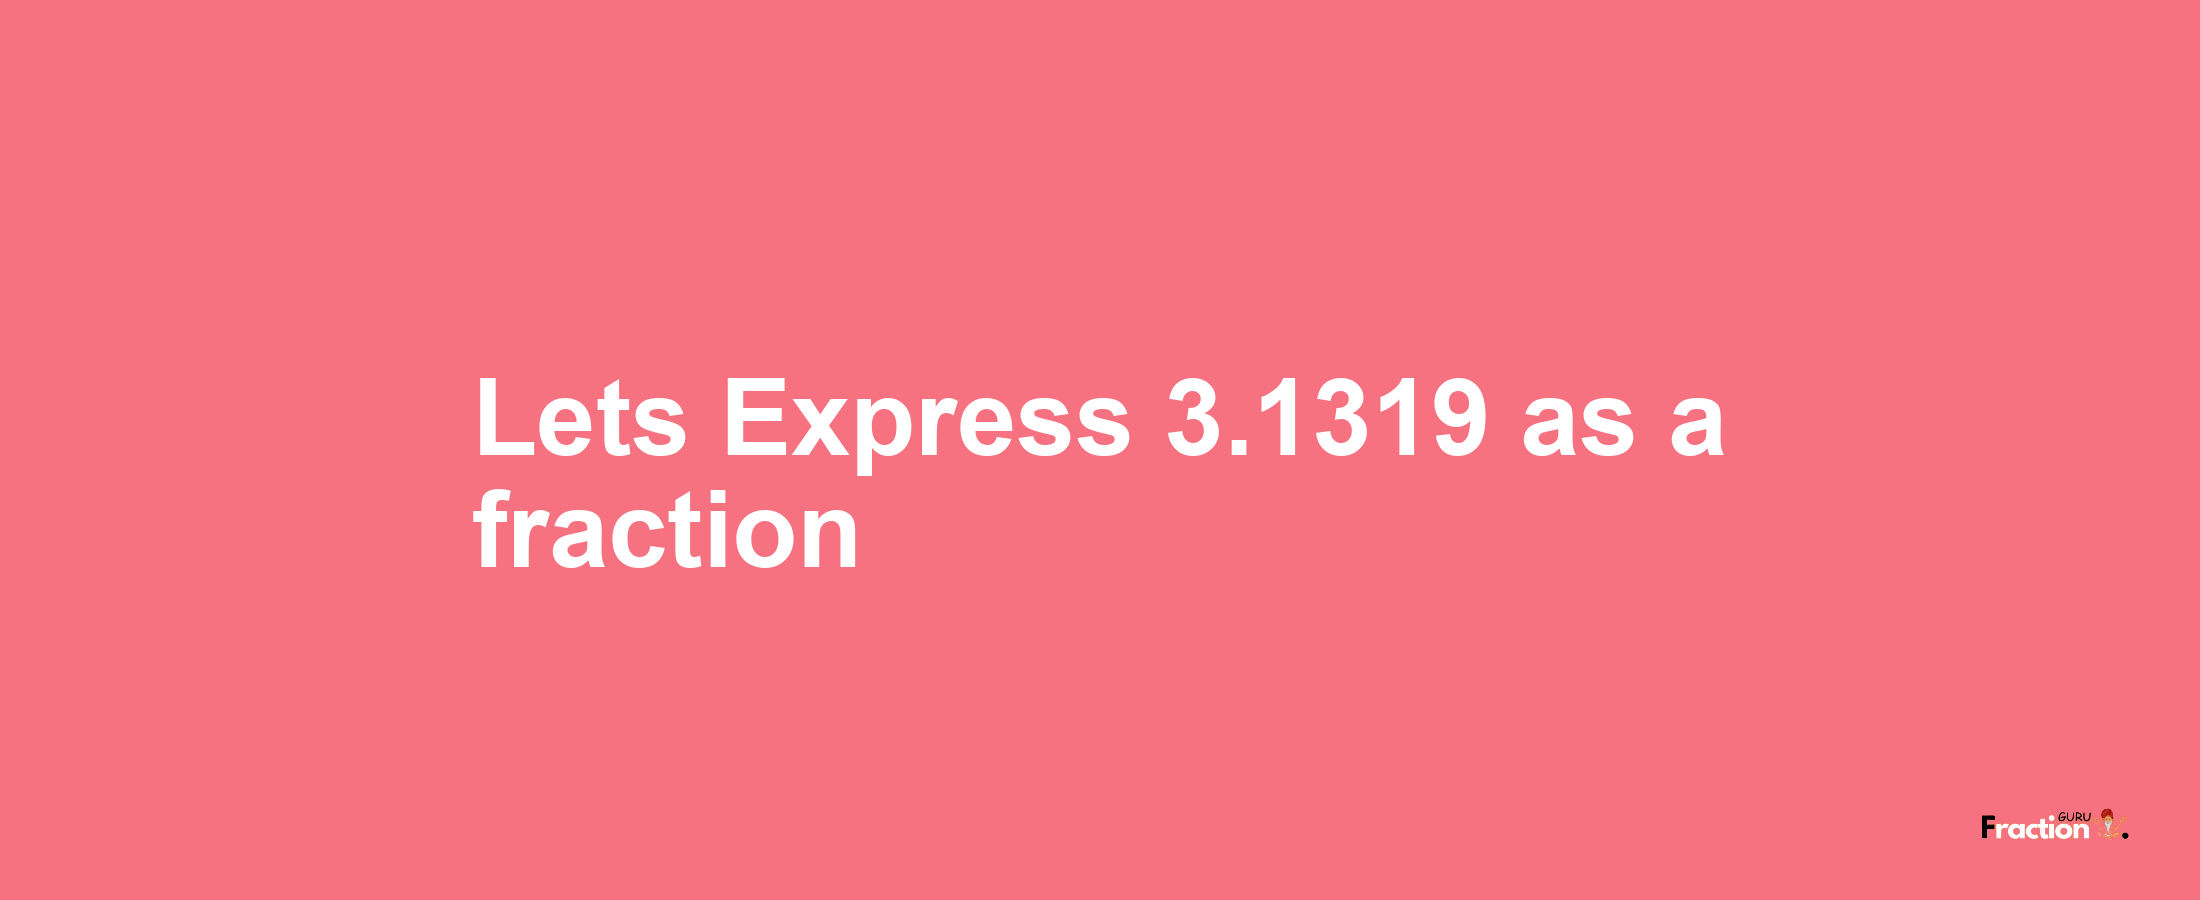 Lets Express 3.1319 as afraction